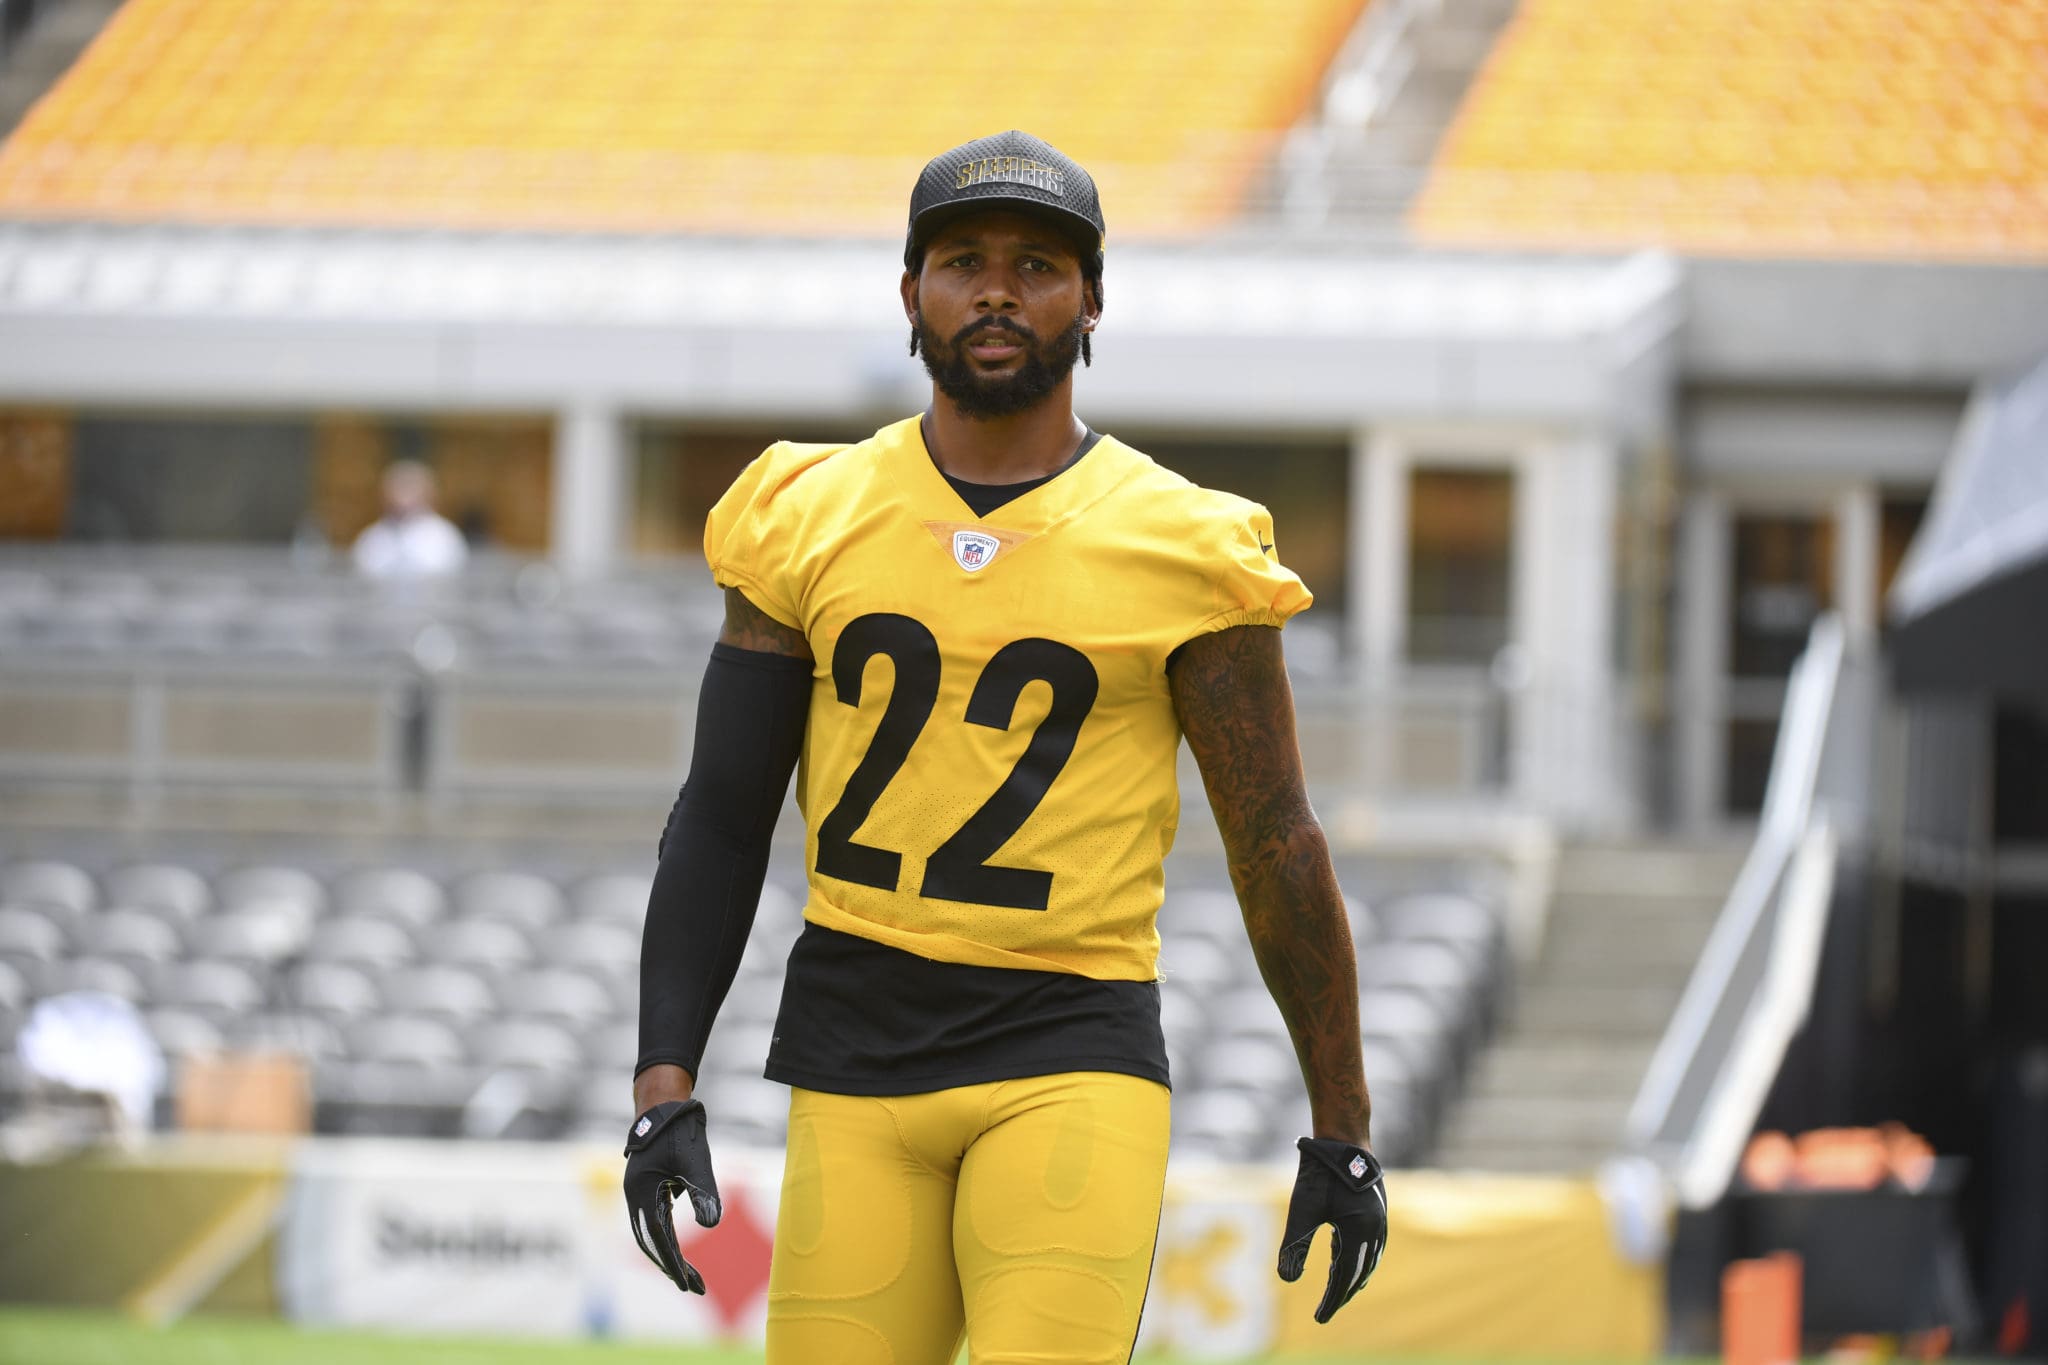 New Steelers' Jersey Numbers May Be The Writing On The Wall For